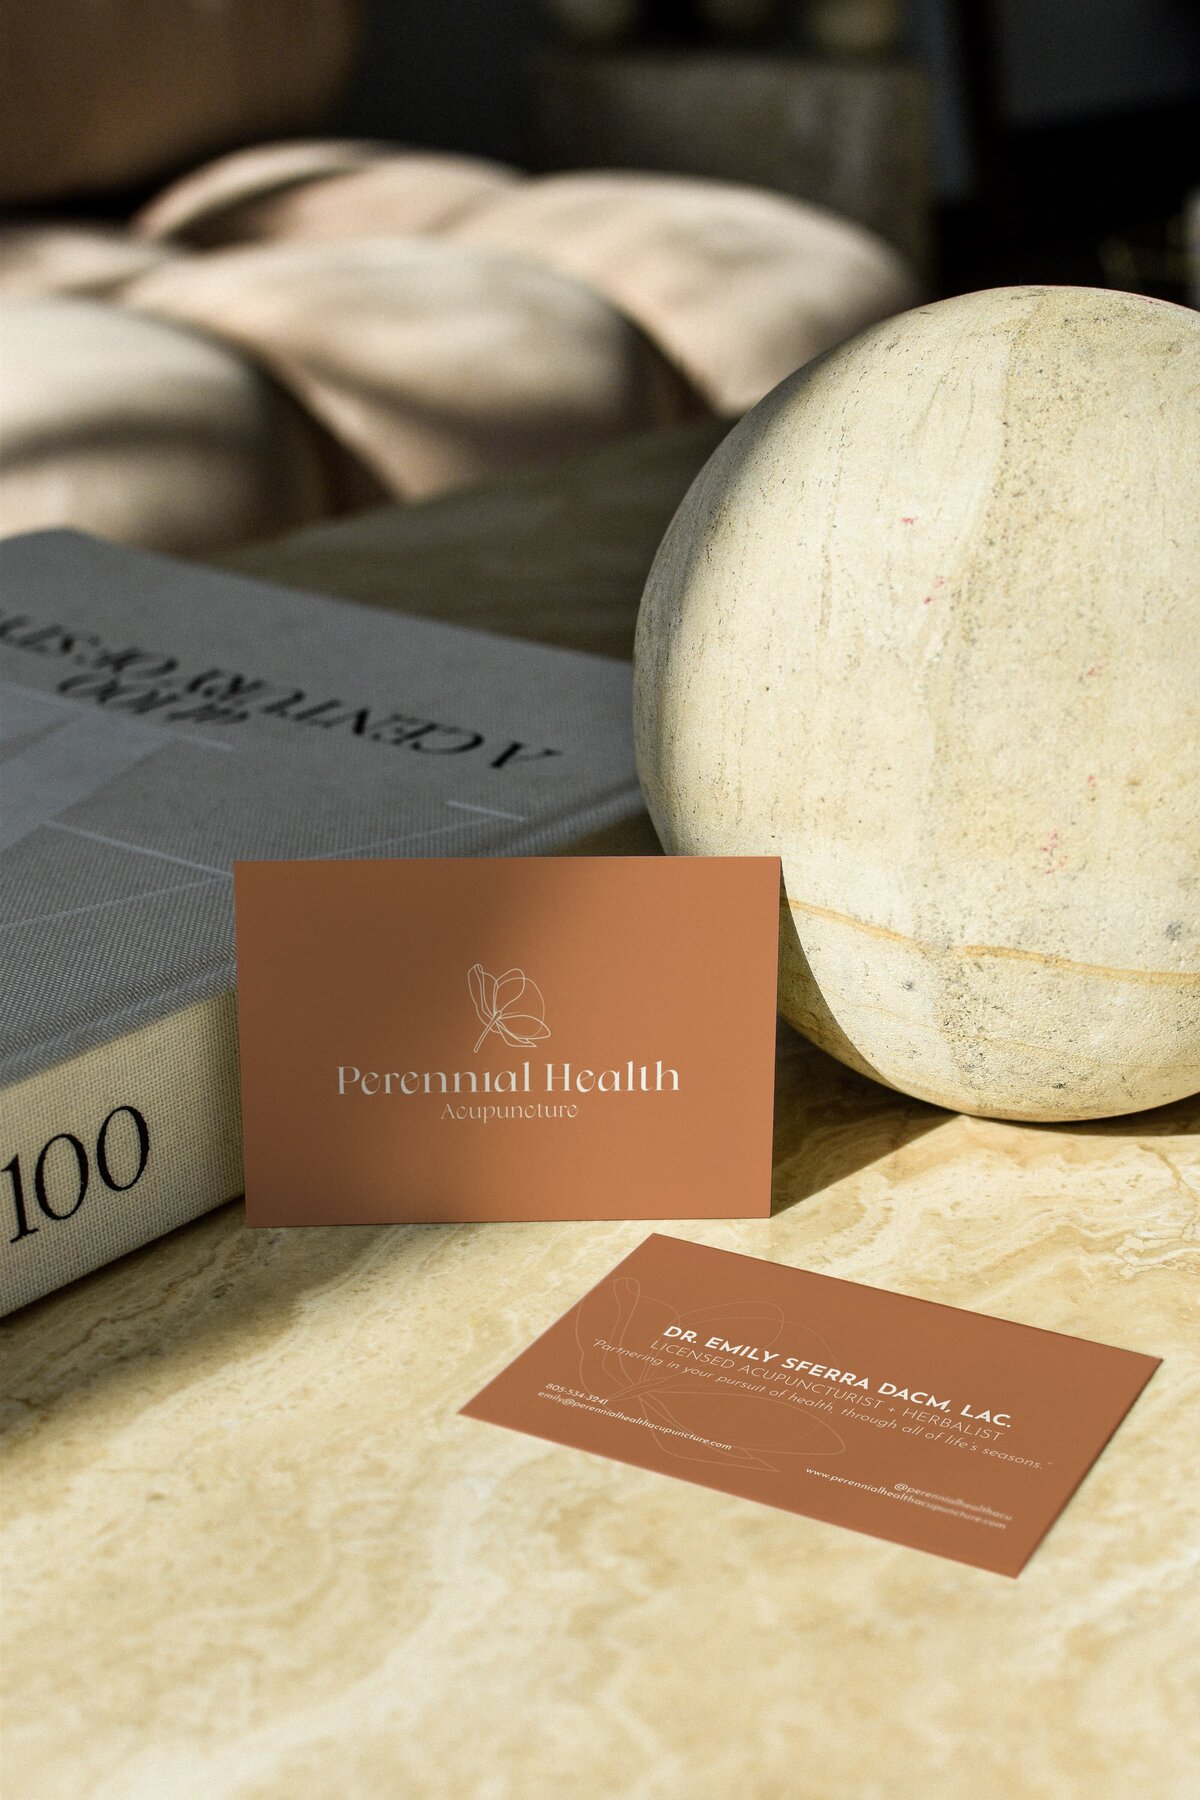 Earthy business card design for wellness business by Hanbury Design Co.